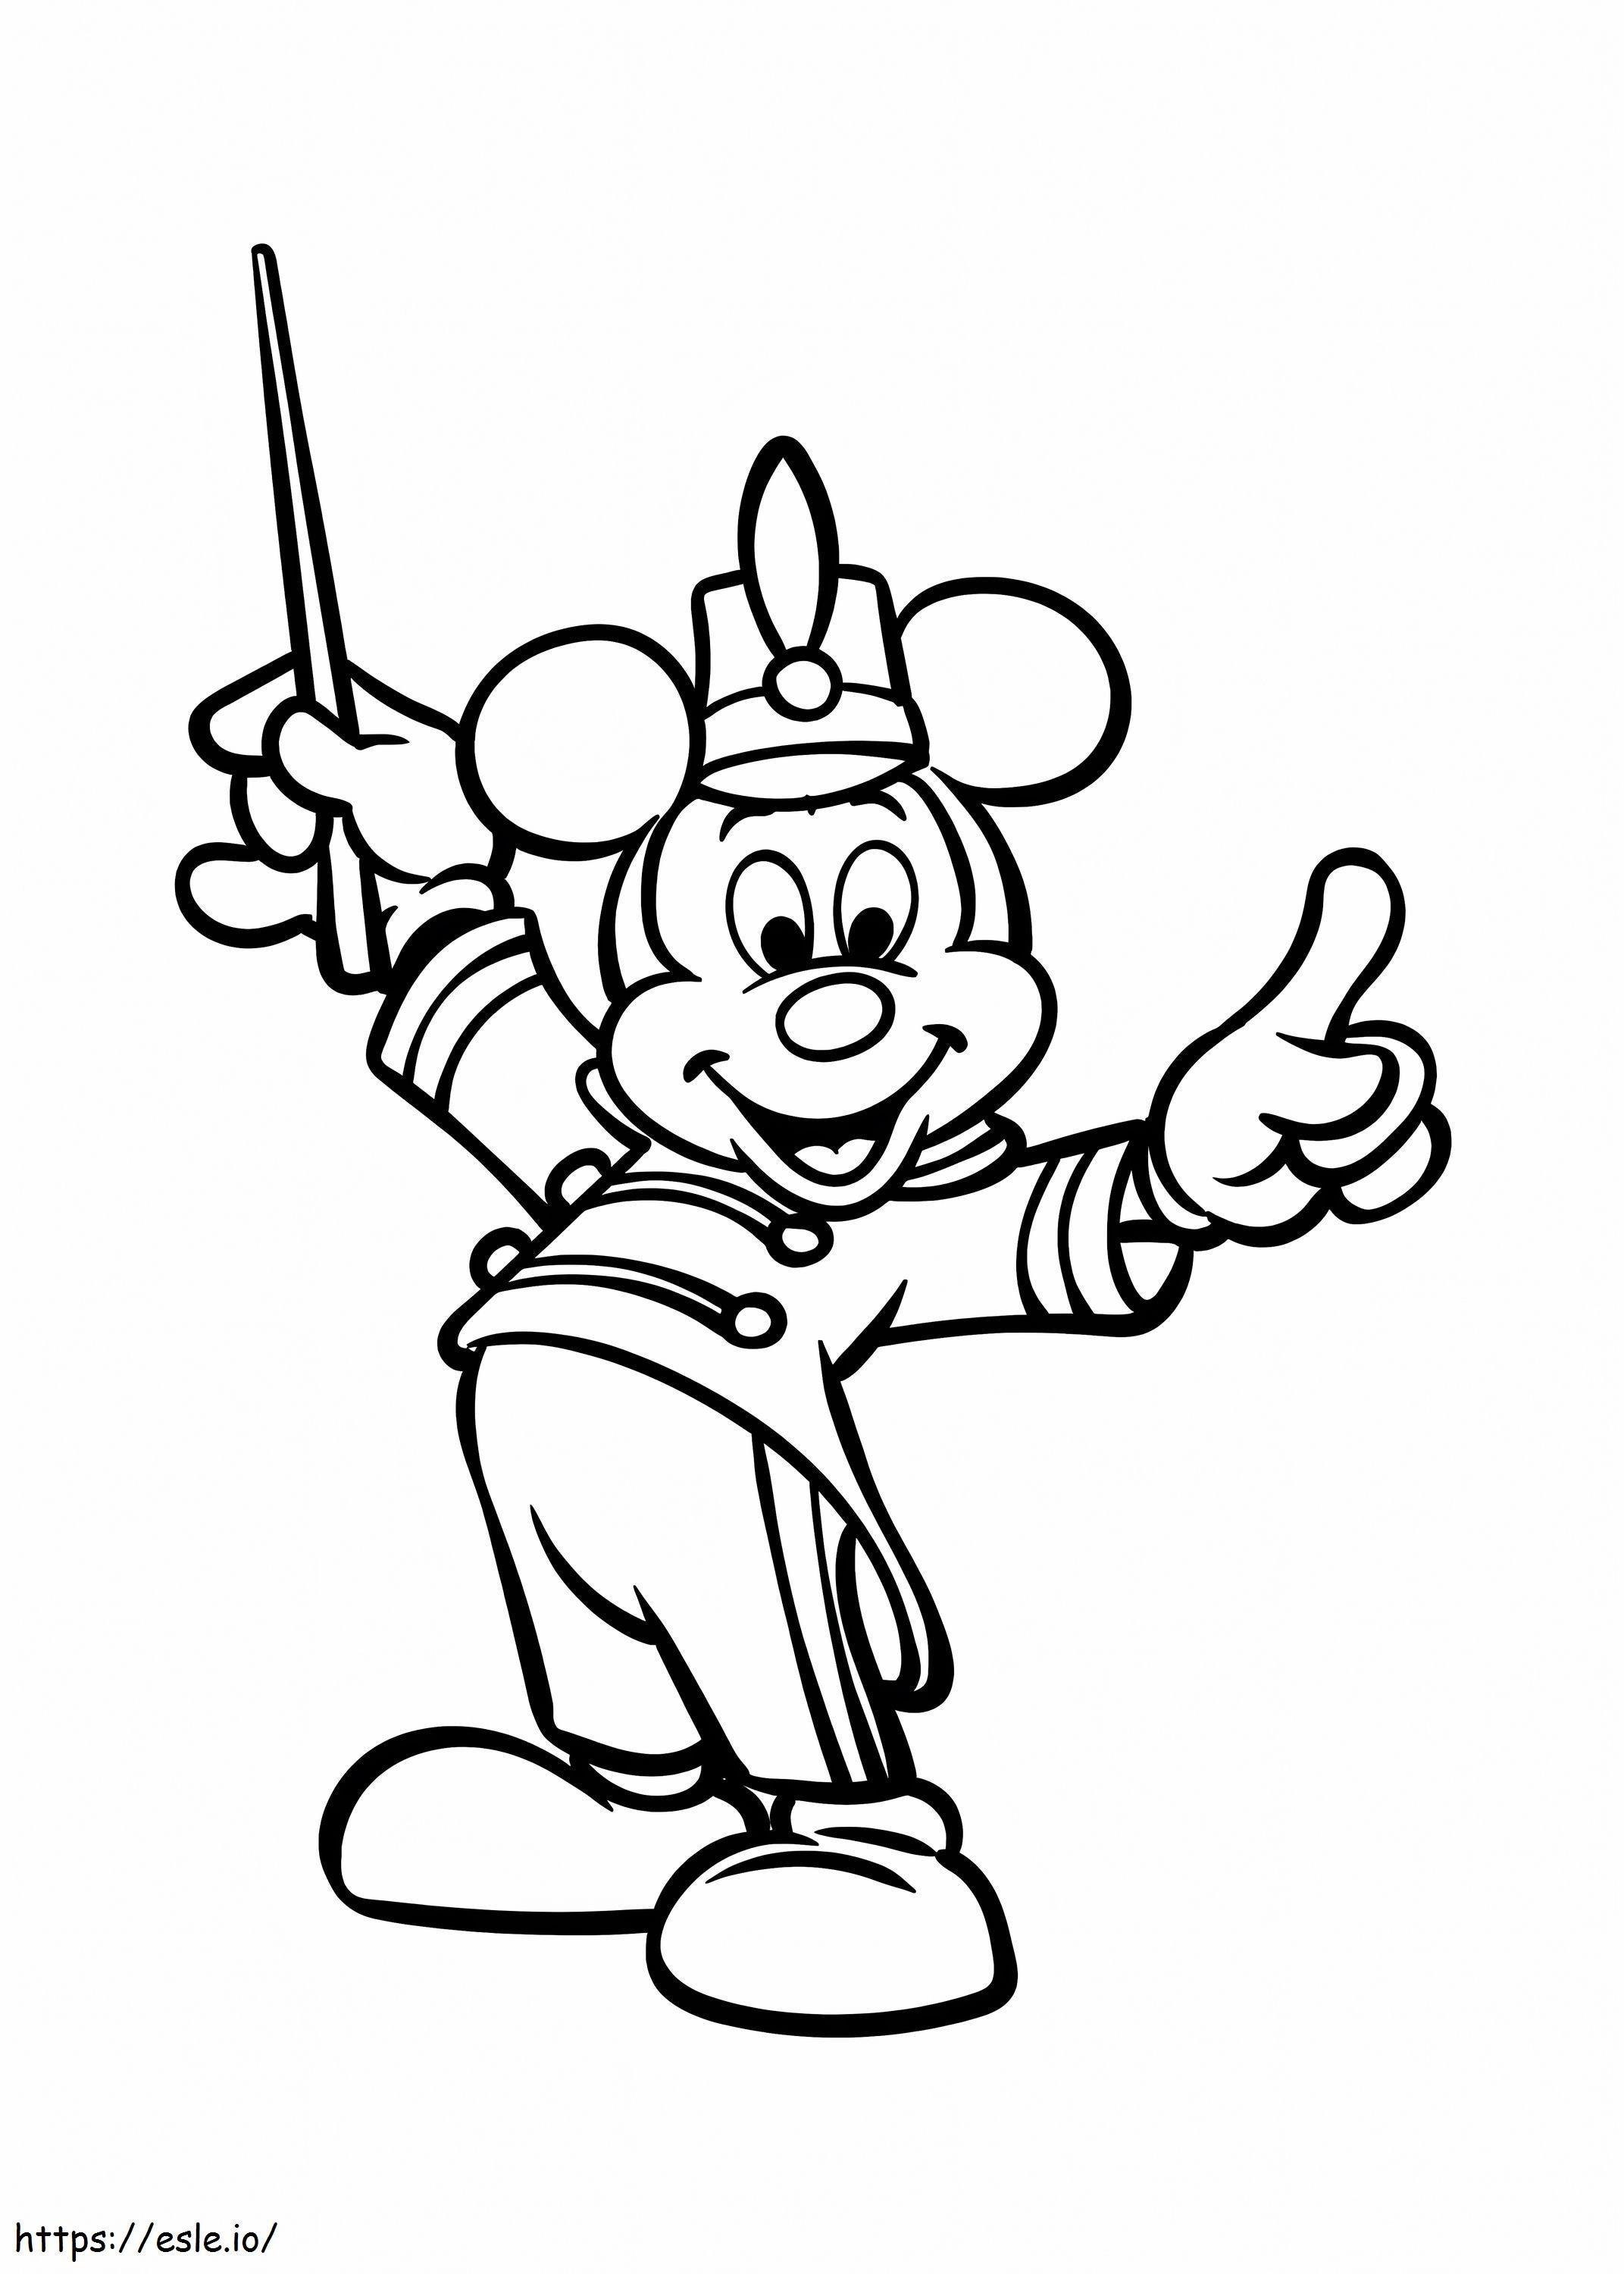 Gran Mickey Mouse coloring page